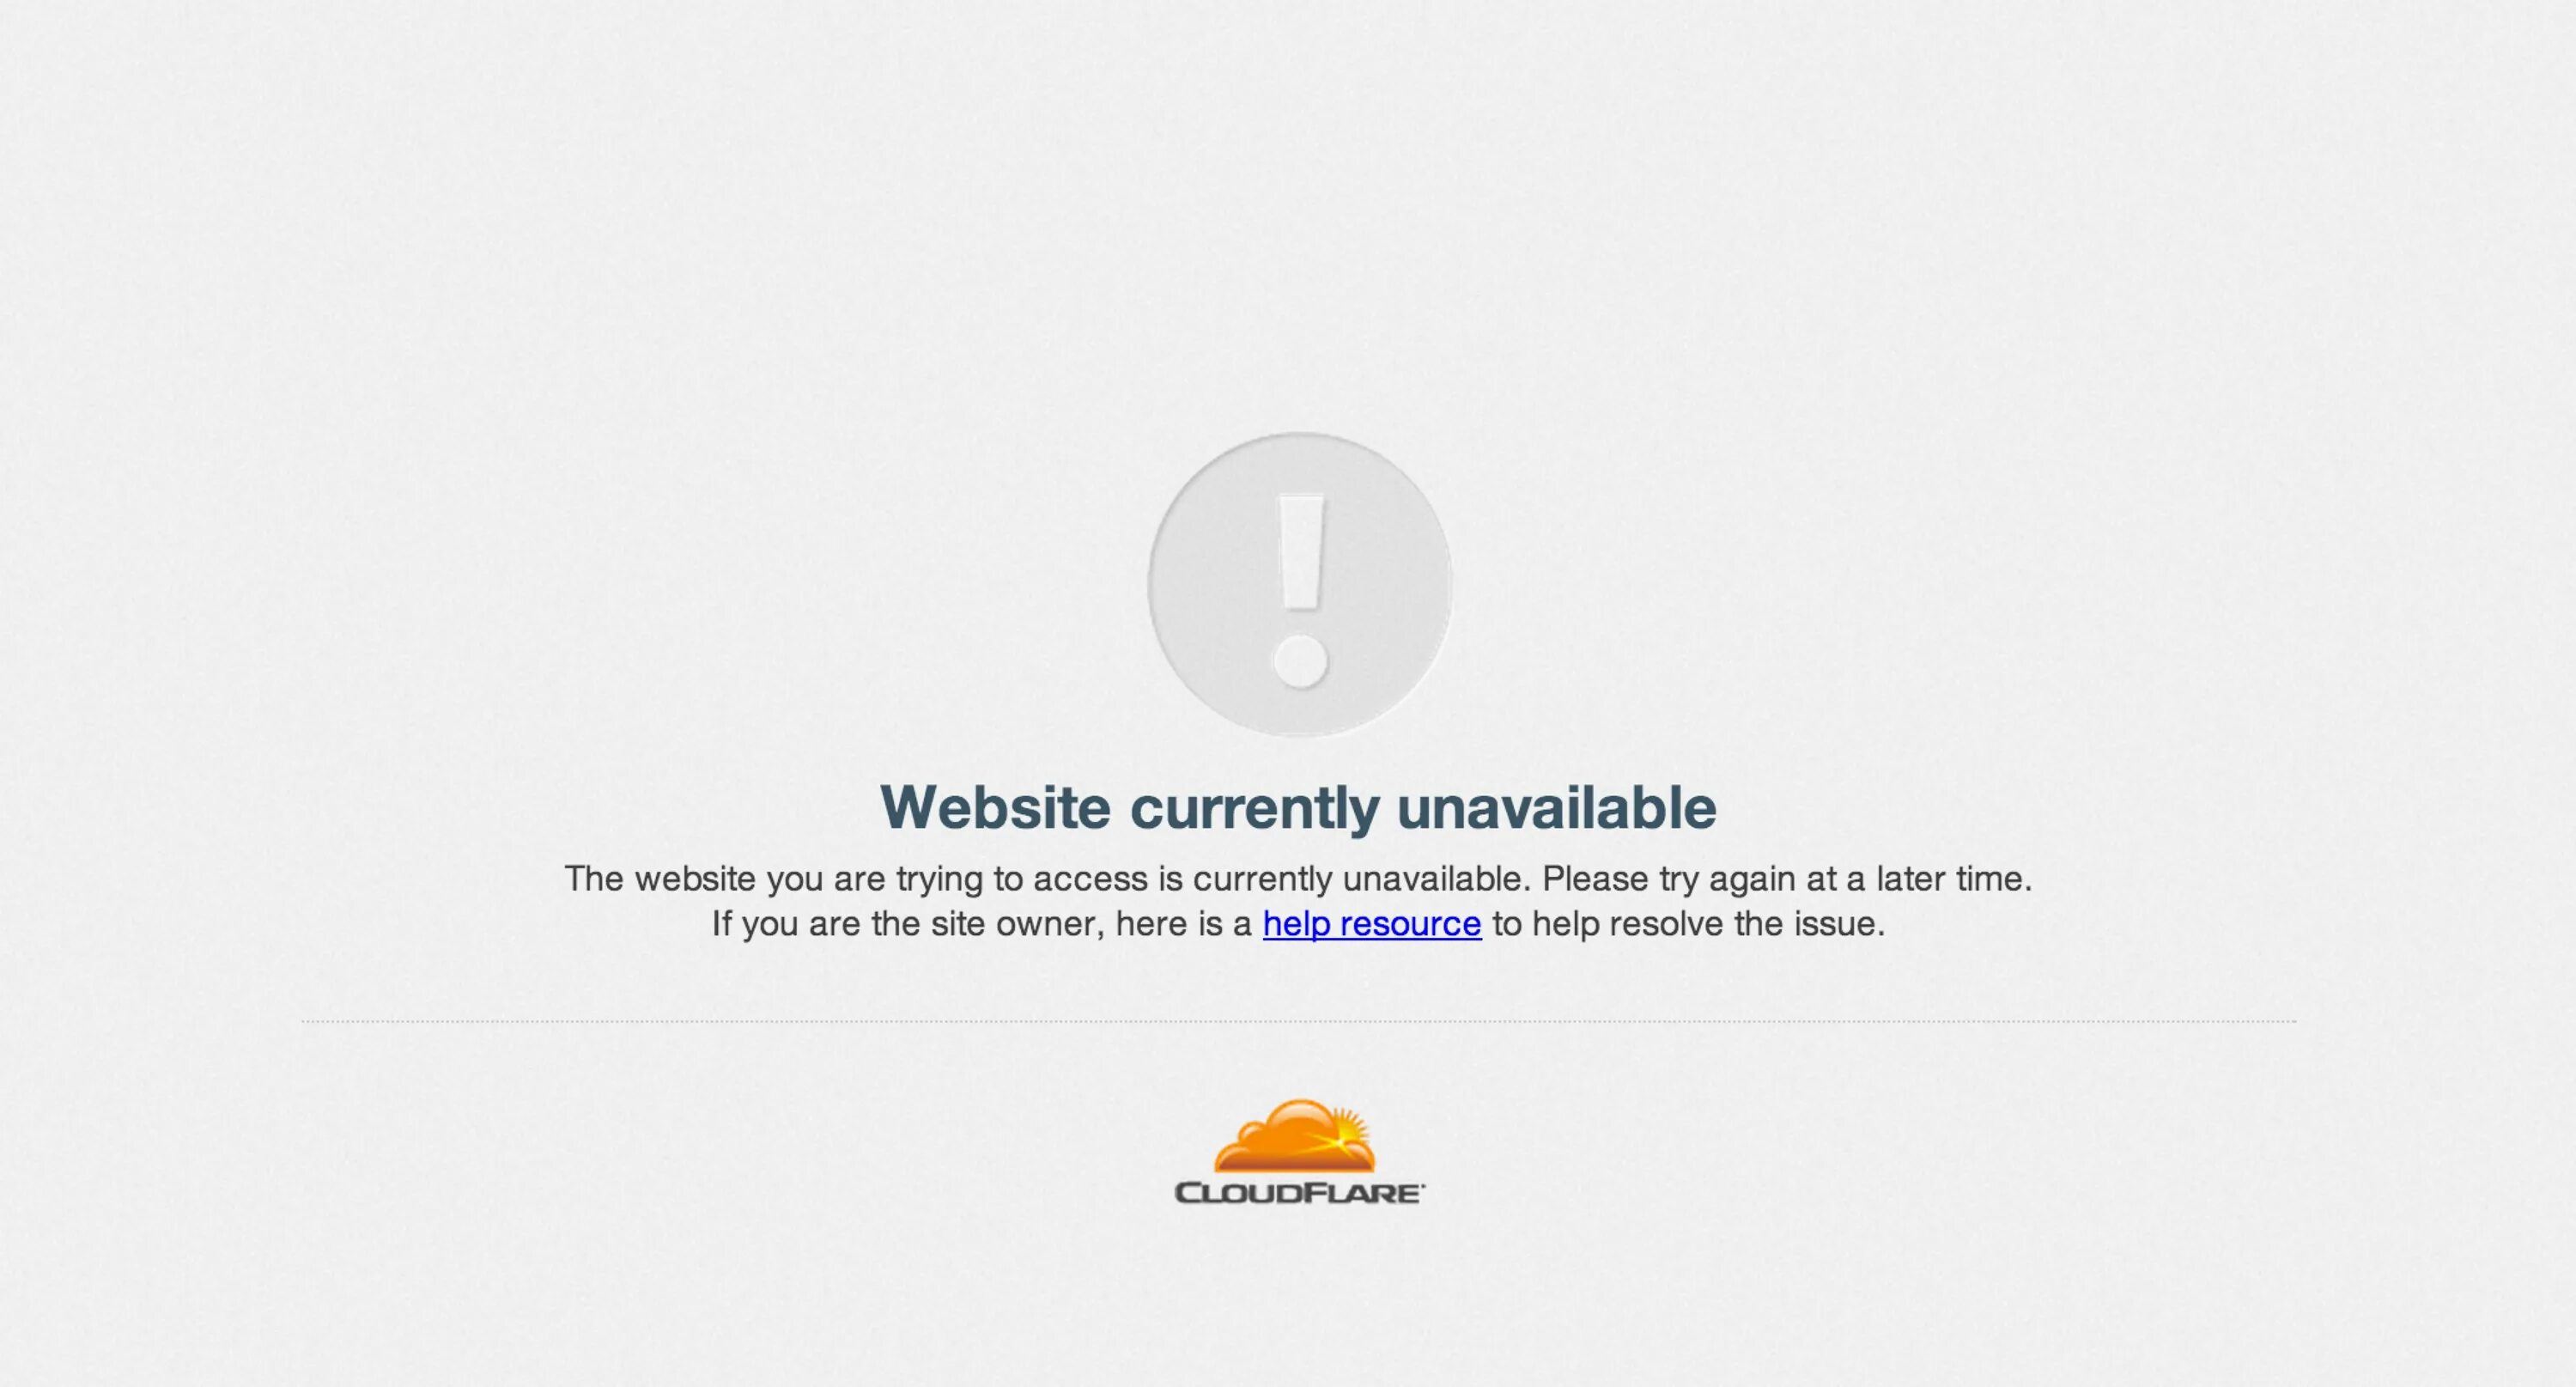 Service unavailable. Currently unavailable. The service is unavailable.. Cloudflare 503 service unavailable.